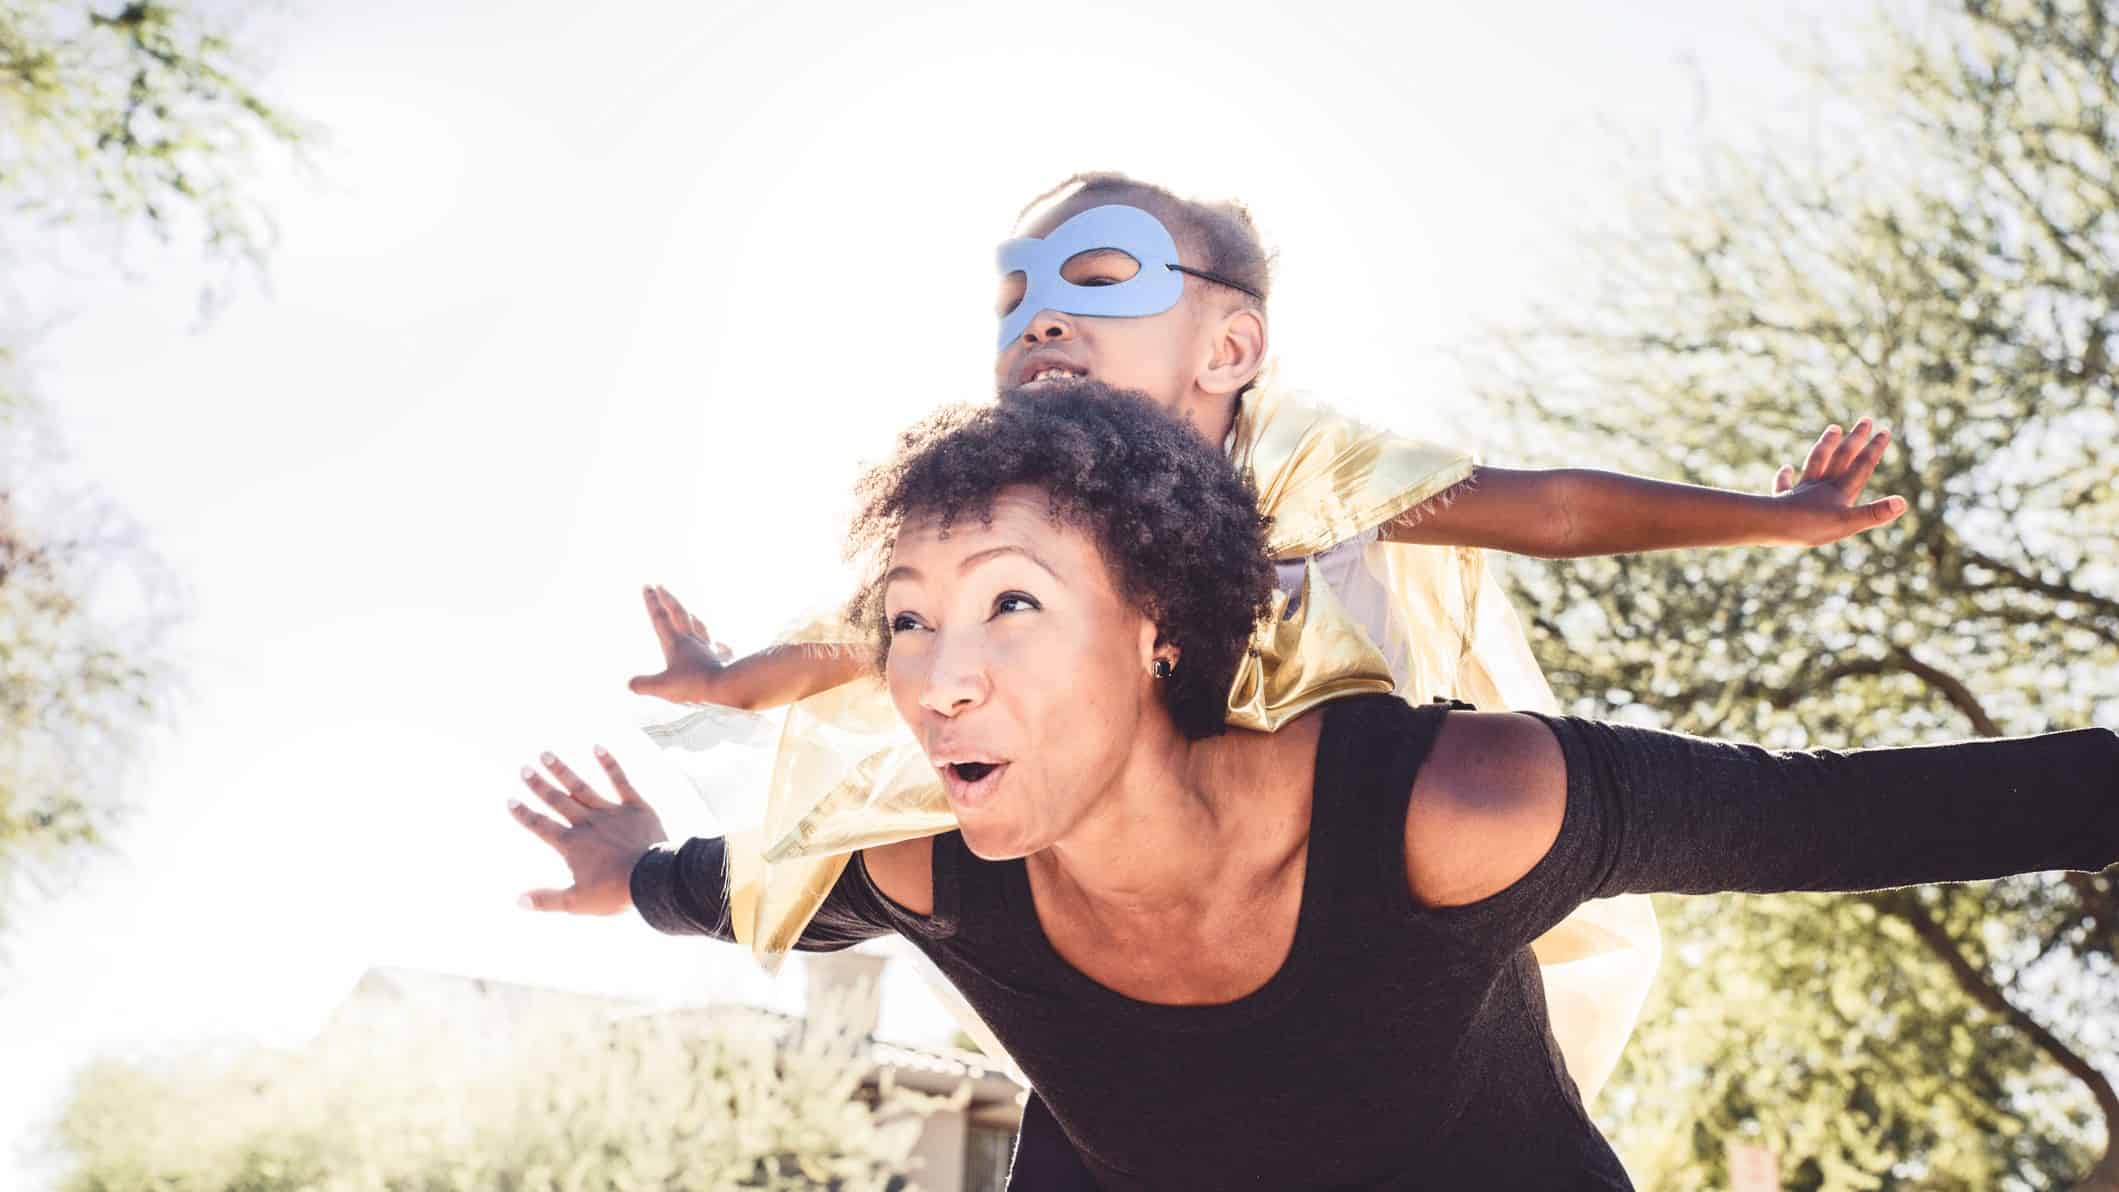 A mum lifts her superhero-face-mask-clad little girl on her shoulders as they both outstretch their arms in flight.